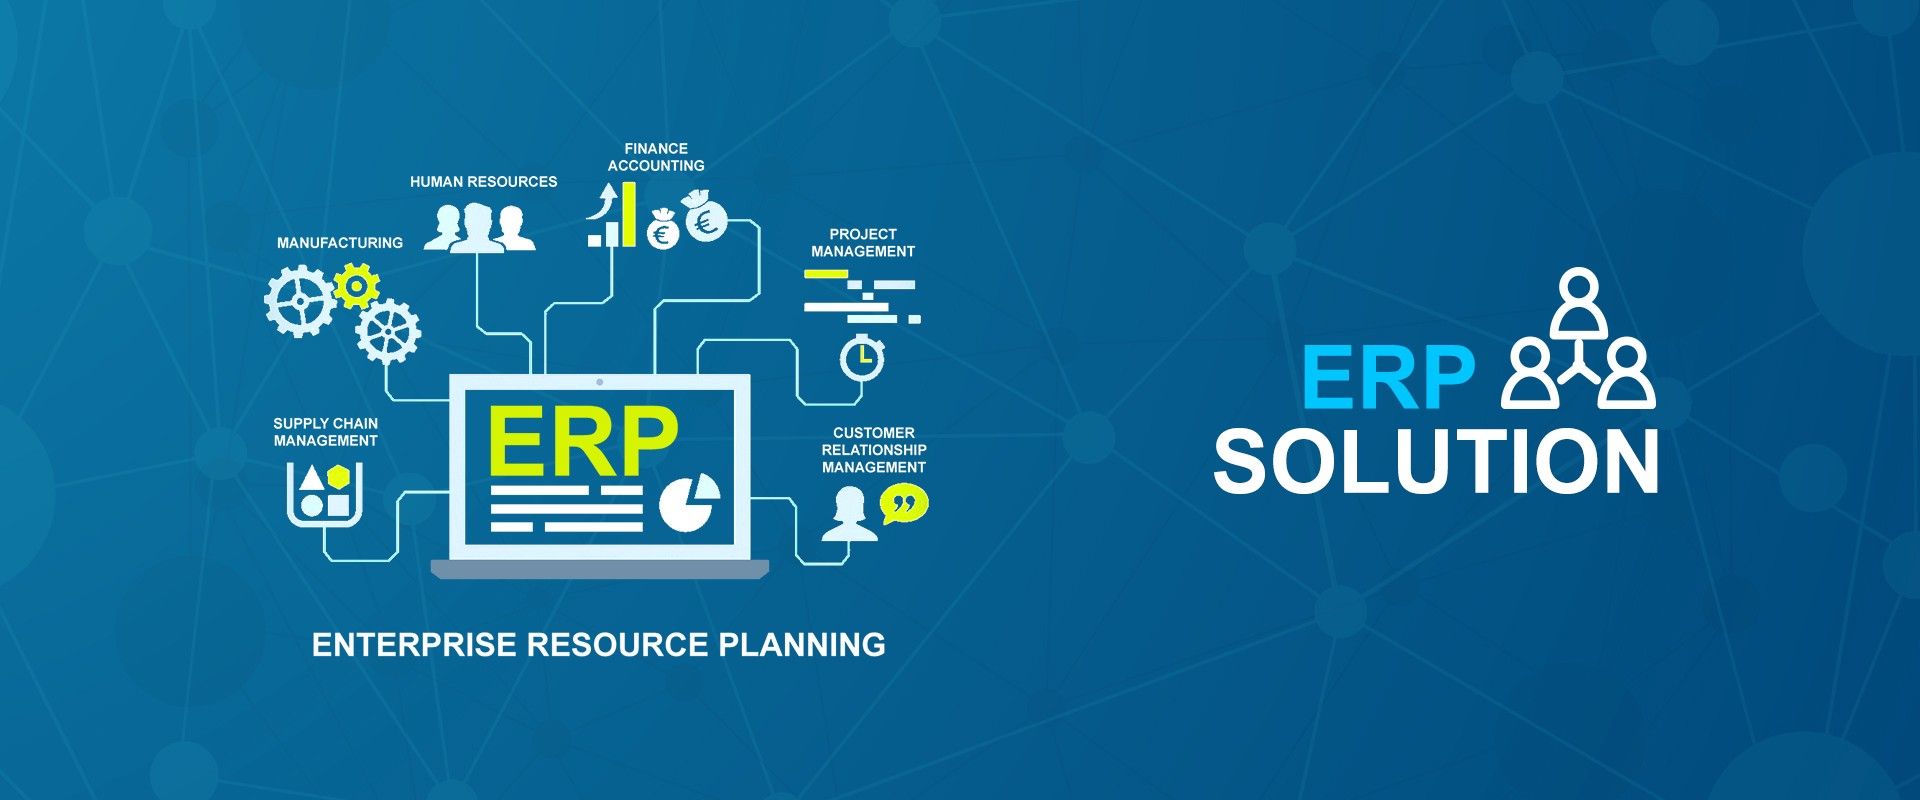 Why an ERP Service Provider is Right for You